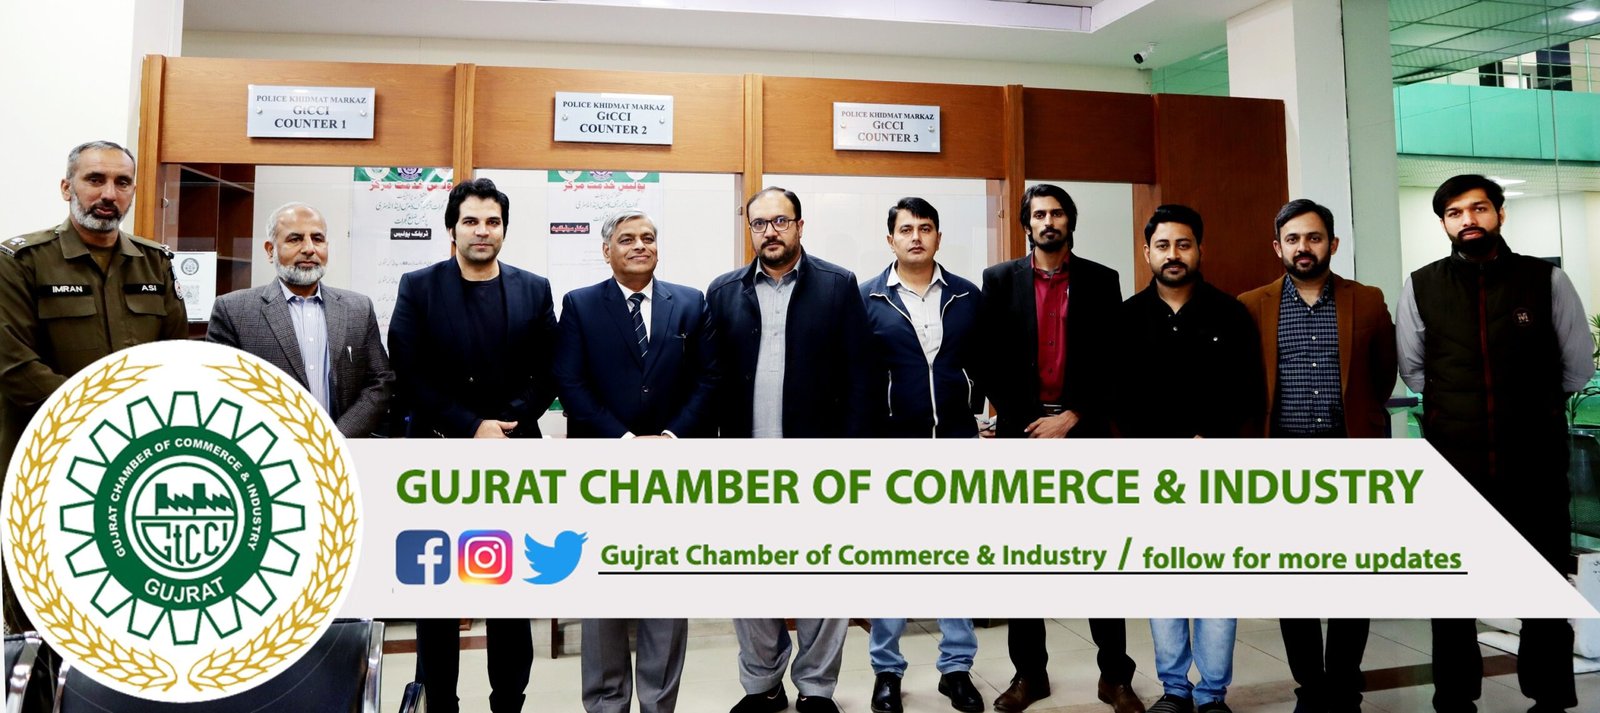 A #delegation of #National_Aerospace_Science _&_Technology_Park (#NASTP) and Air_University_Kharian   in the #leadership of Mr. Amir Rasheed #Air_Vice_Marshal #Chief_Project_Director (NASTP) #Pakistan #Airforce Complex Kharian visited #Gujrat_Chamber_of_Commerce & Industry and had a meeting with Mr. Sikander Ishfaq Razi #President #GtCCI.